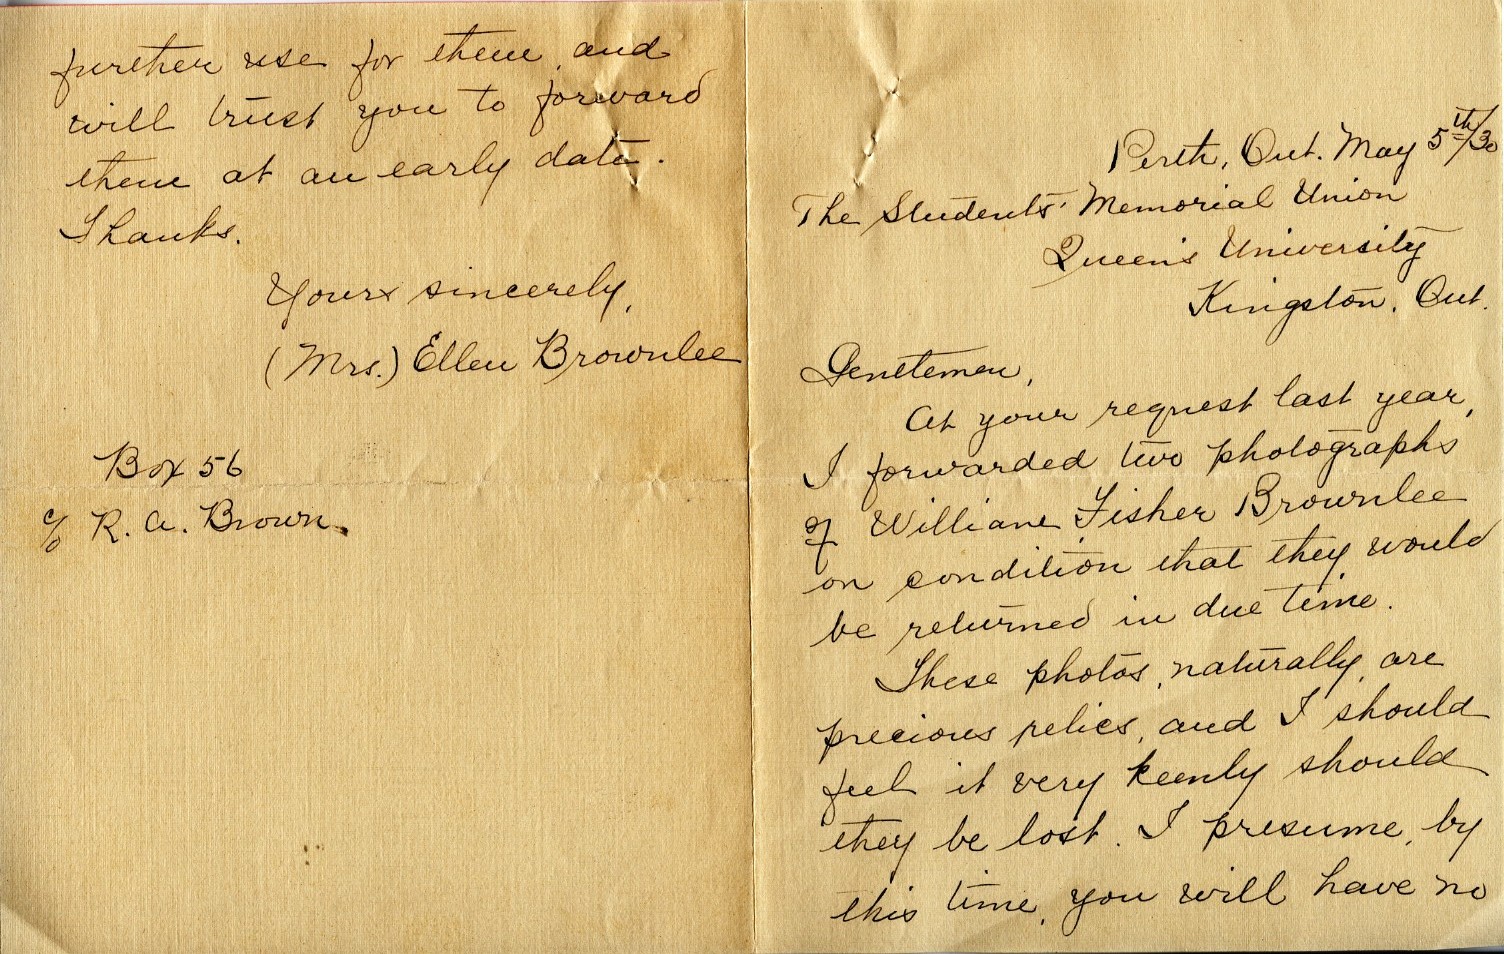 Letter from Mrs. Ellen Brownlee, 5th May 1930